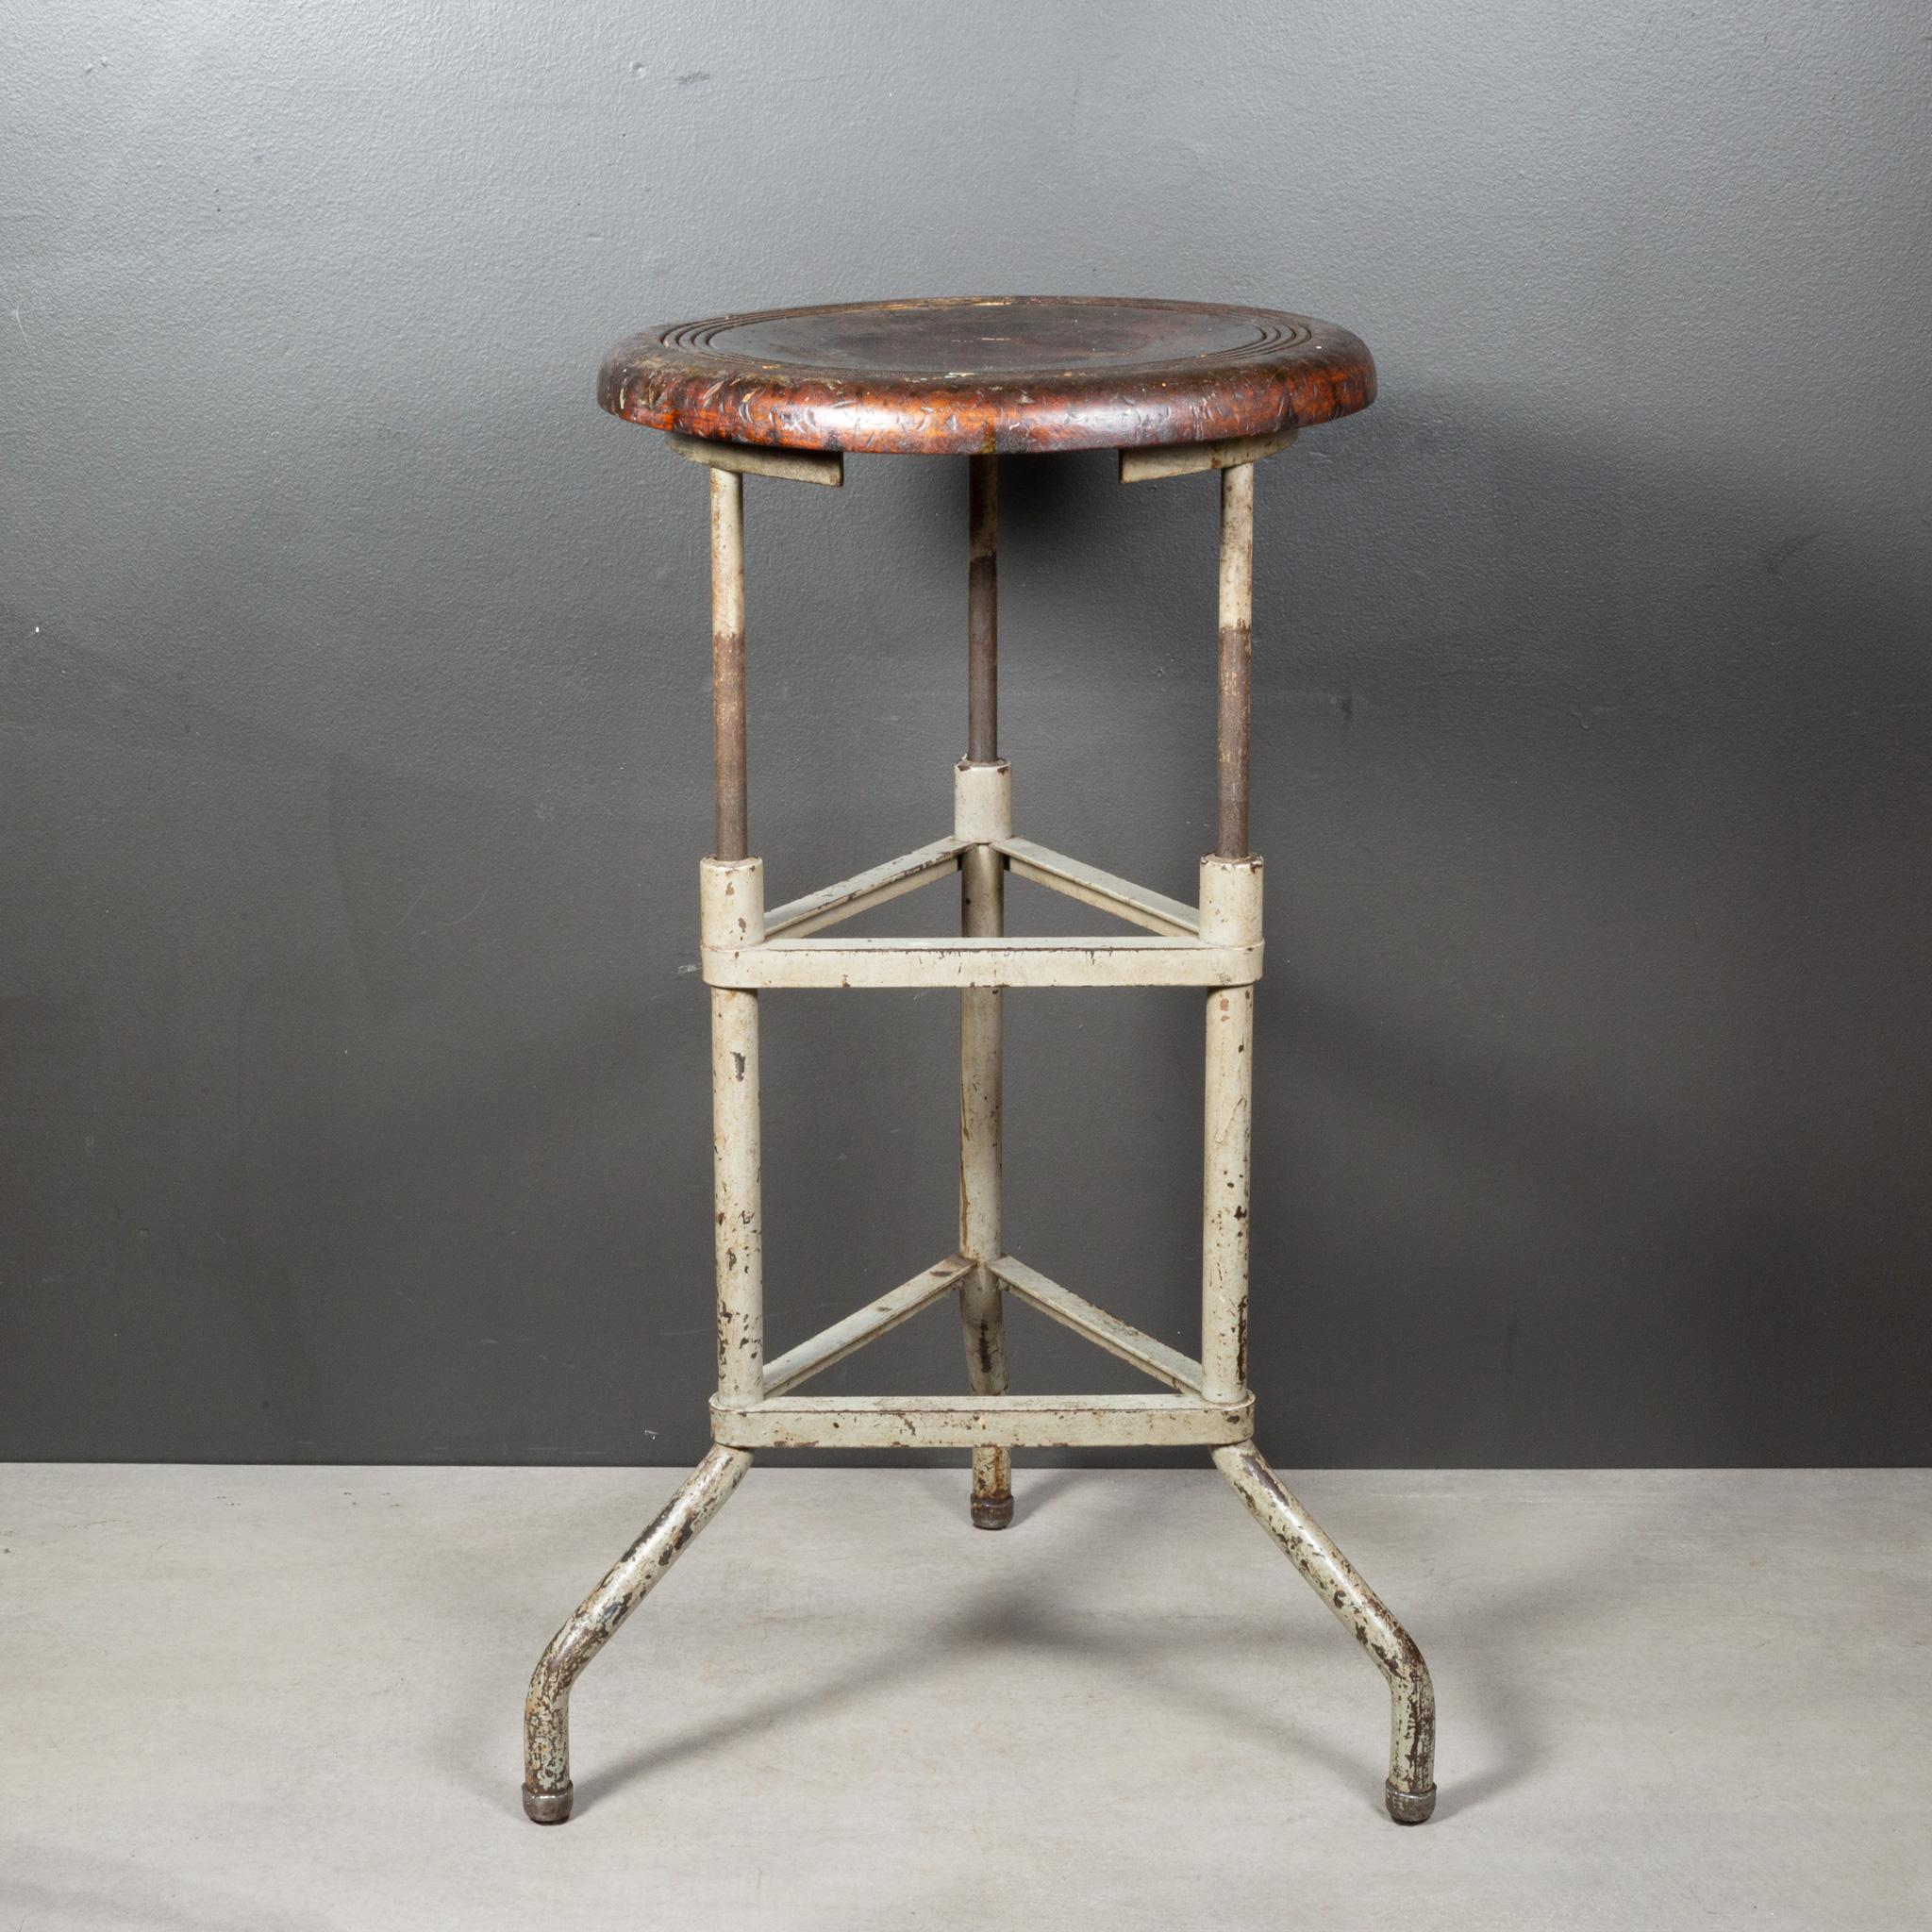 Depression Era Adjustable Machinist Stool with Maple Seat c.1930-1940 In Good Condition For Sale In San Francisco, CA